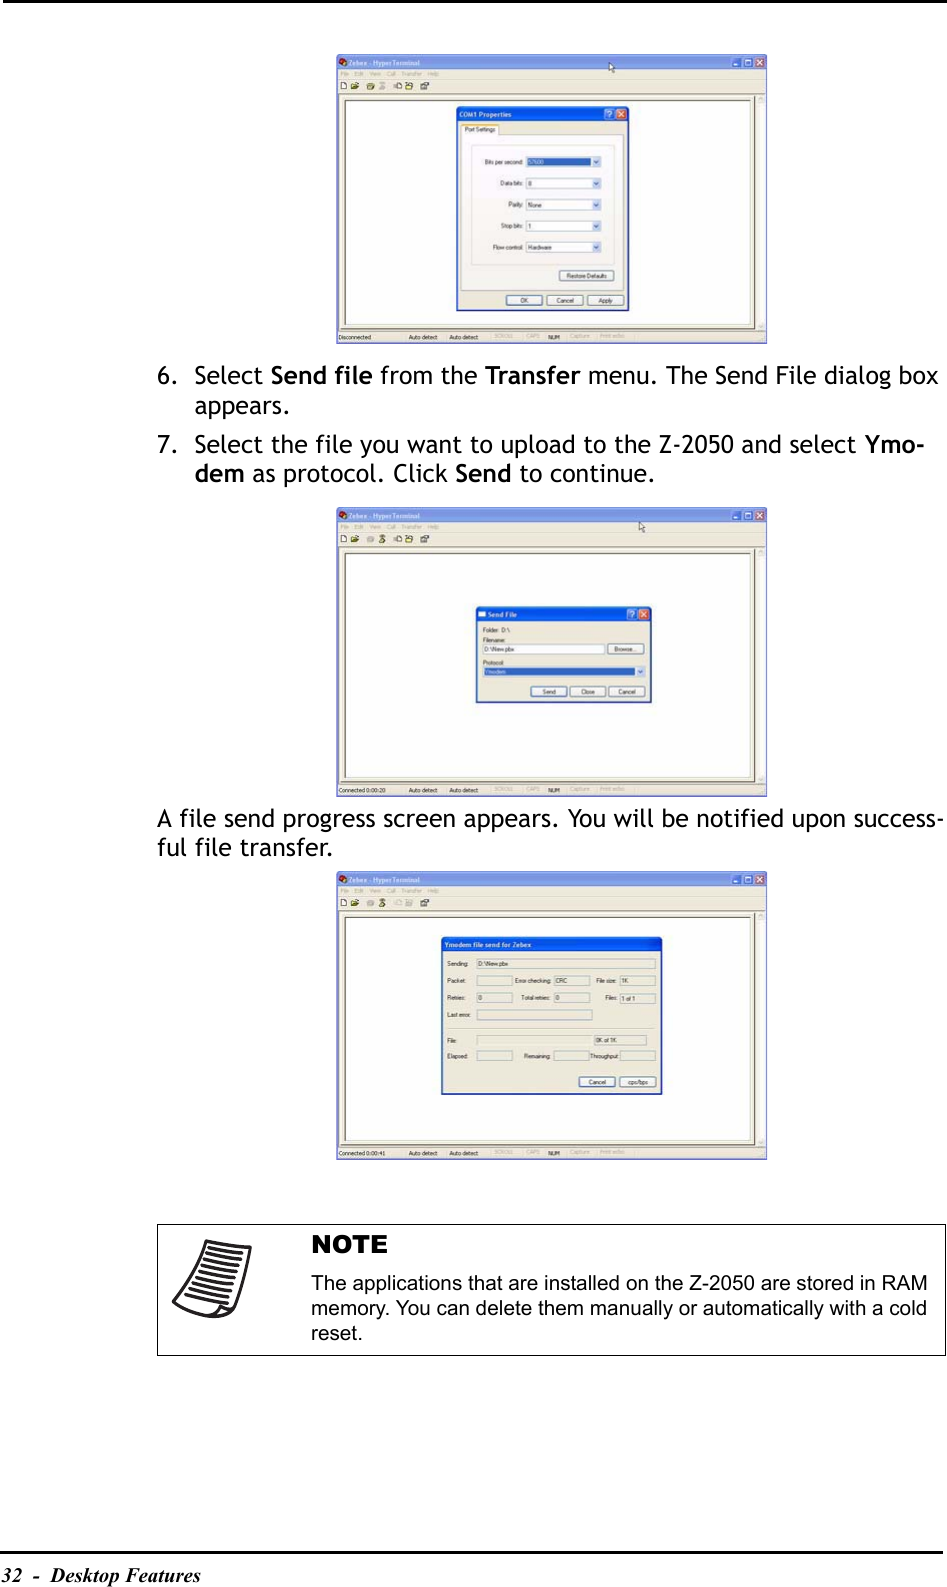 32  -  Desktop Features6. Select Send file from the Transfer menu. The Send File dialog box appears.7. Select the file you want to upload to the Z-2050 and select Ymo-dem as protocol. Click Send to continue.A file send progress screen appears. You will be notified upon success-ful file transfer.NOTEThe applications that are installed on the Z-2050 are stored in RAM memory. You can delete them manually or automatically with a cold reset.